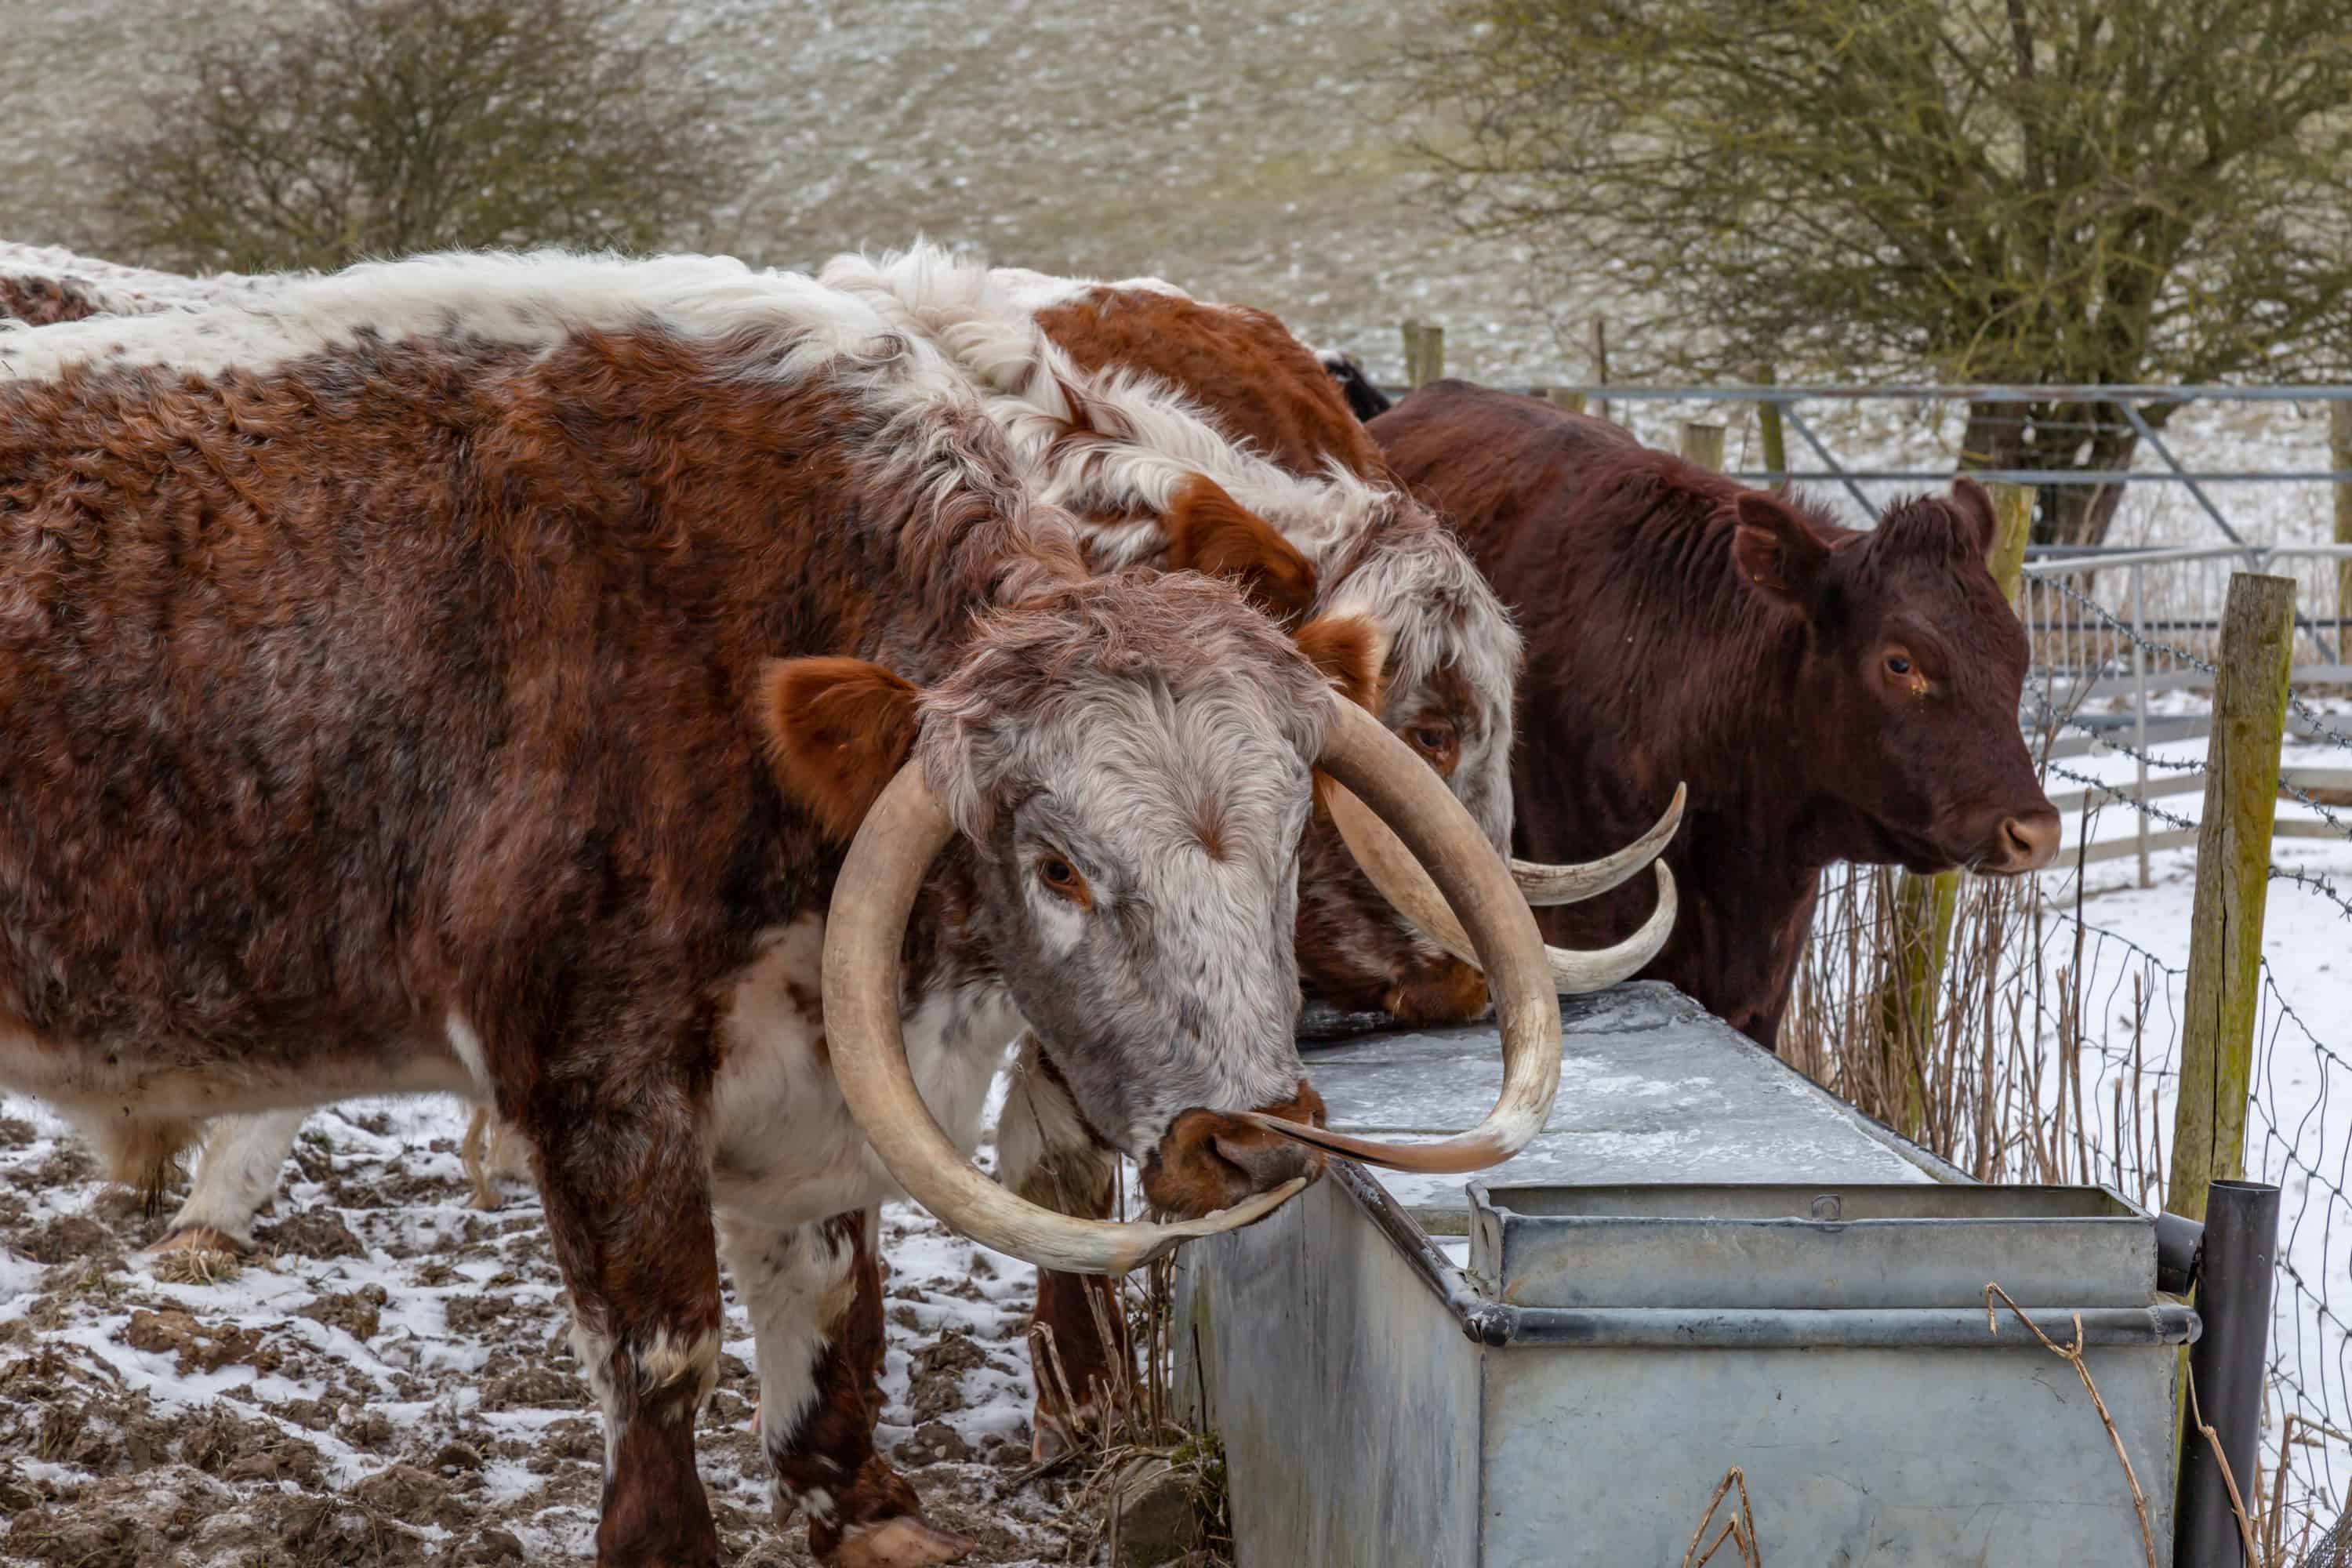 How to keep livestock water from freezing - Purely Wholesome Farm